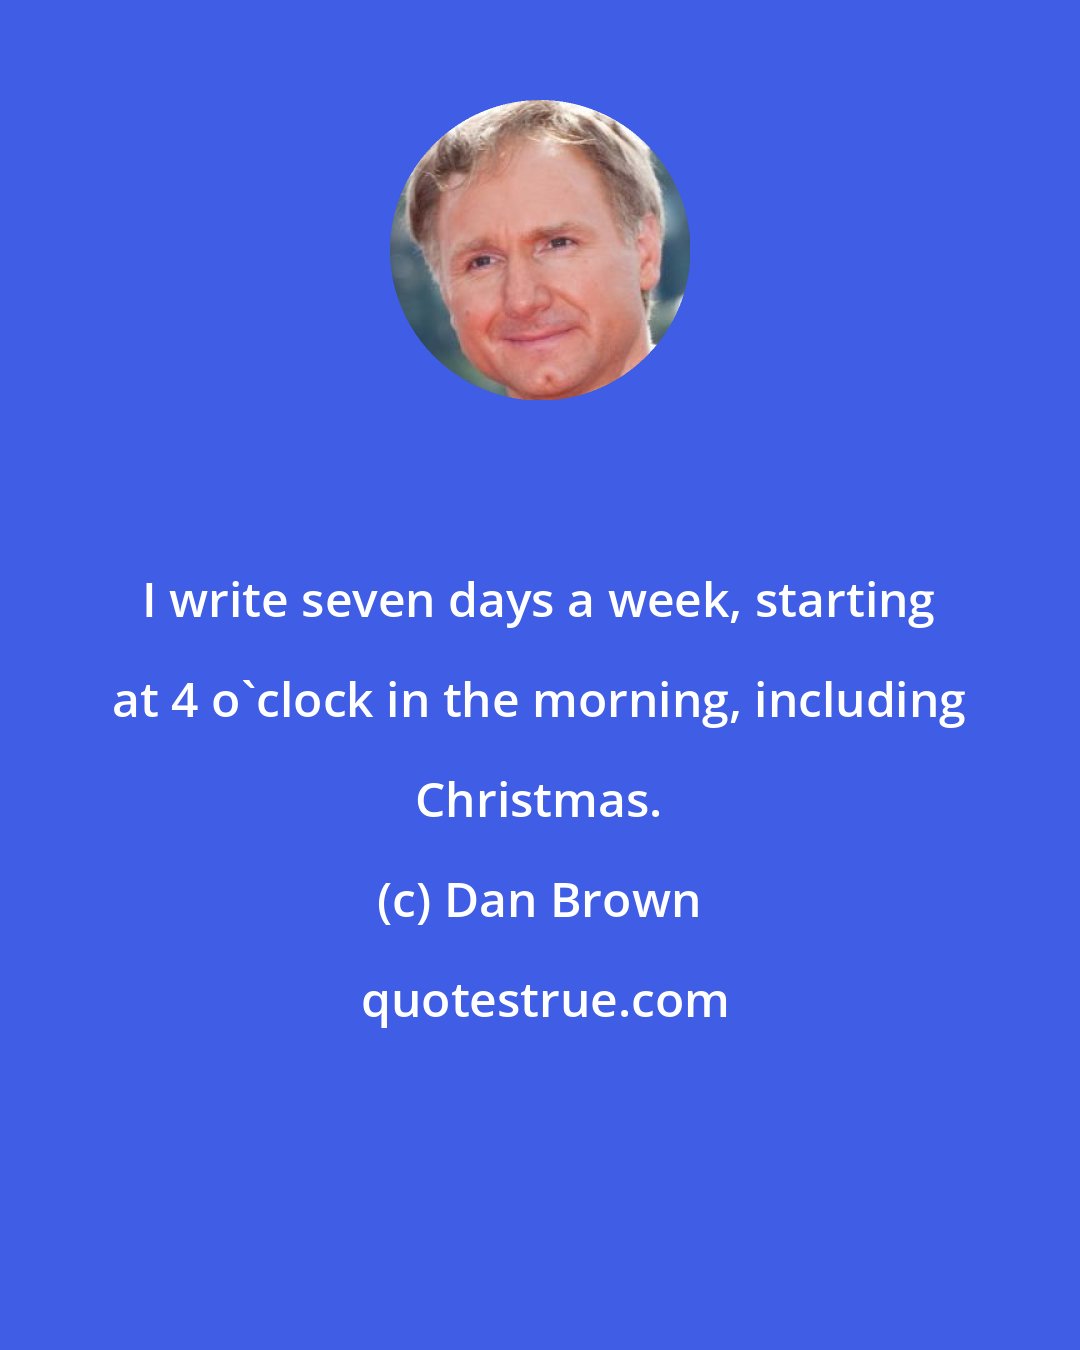 Dan Brown: I write seven days a week, starting at 4 o'clock in the morning, including Christmas.